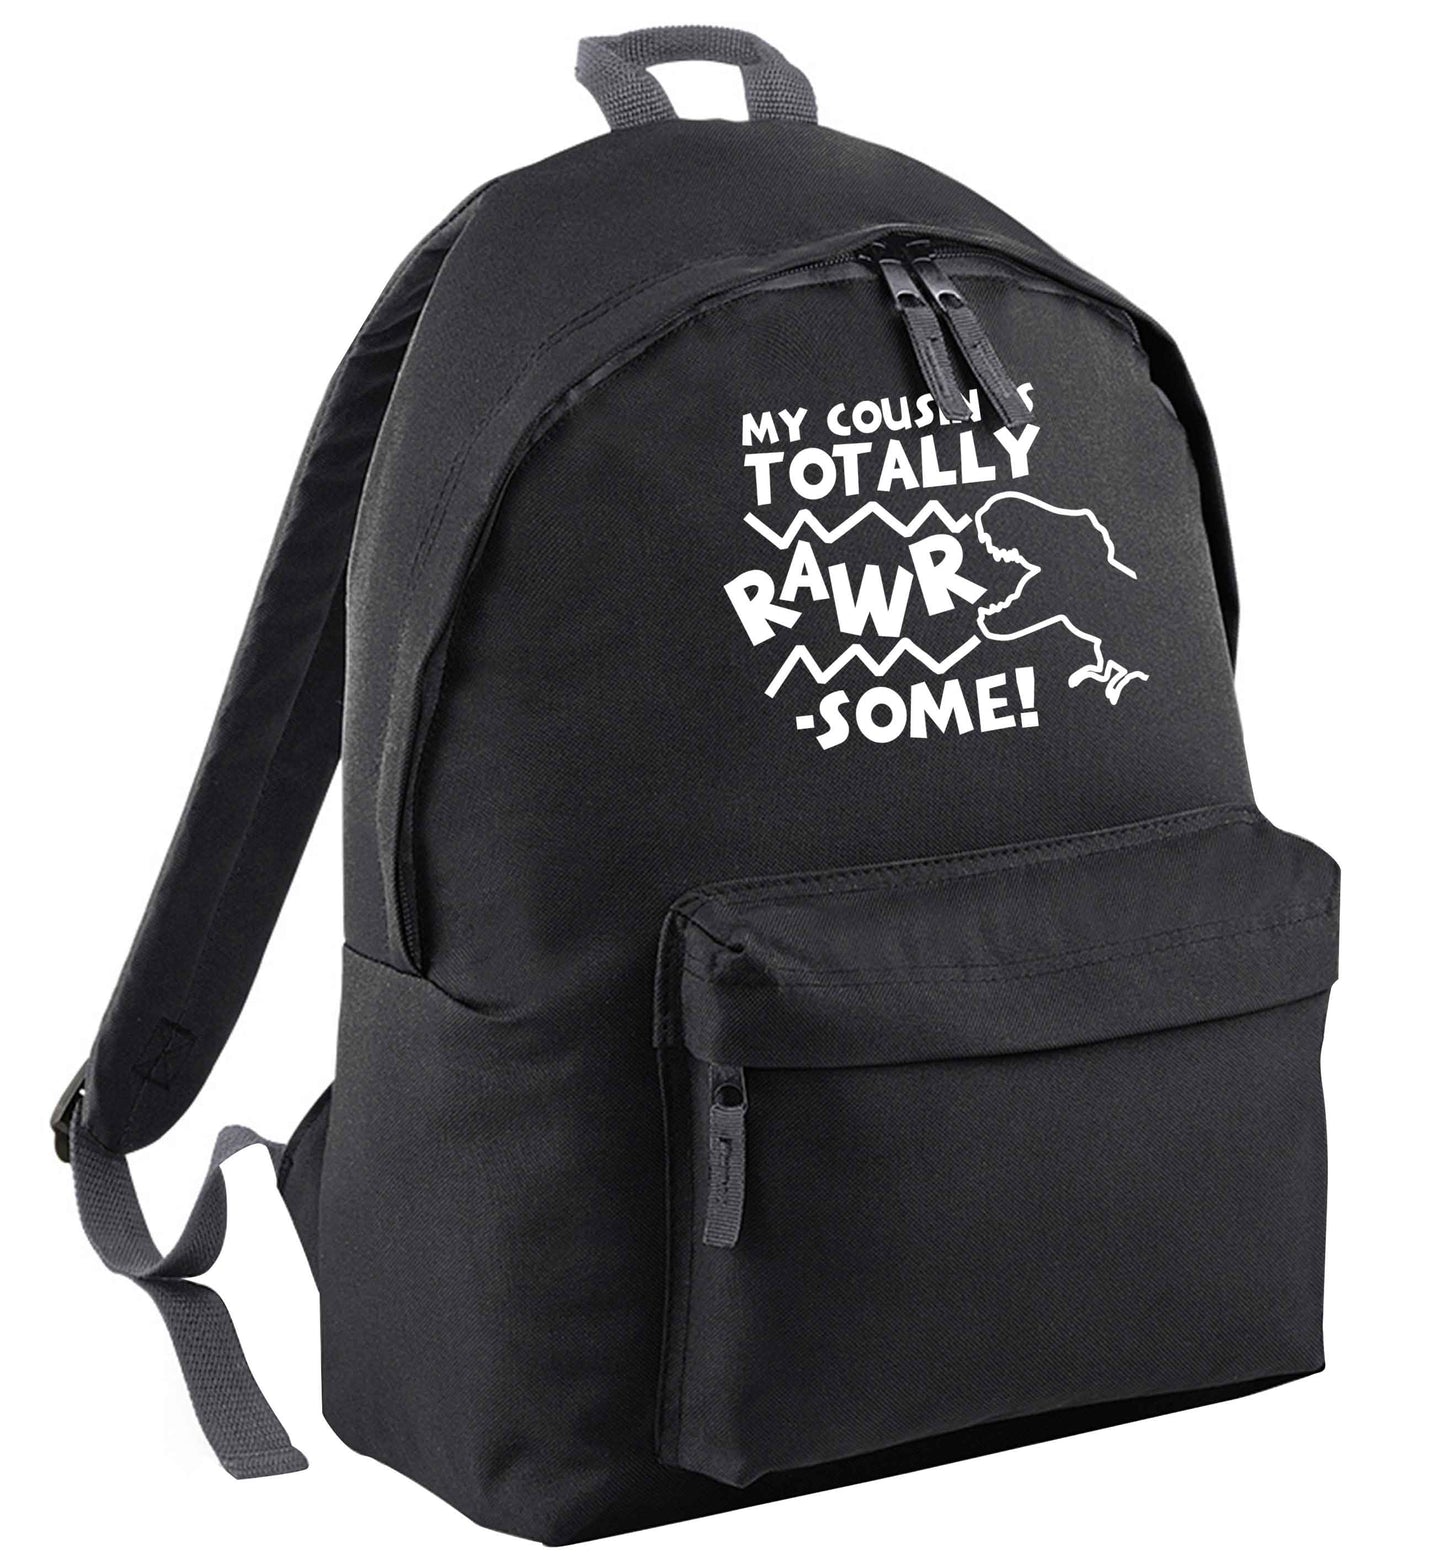 My cousin is totally rawrsome | Adults backpack